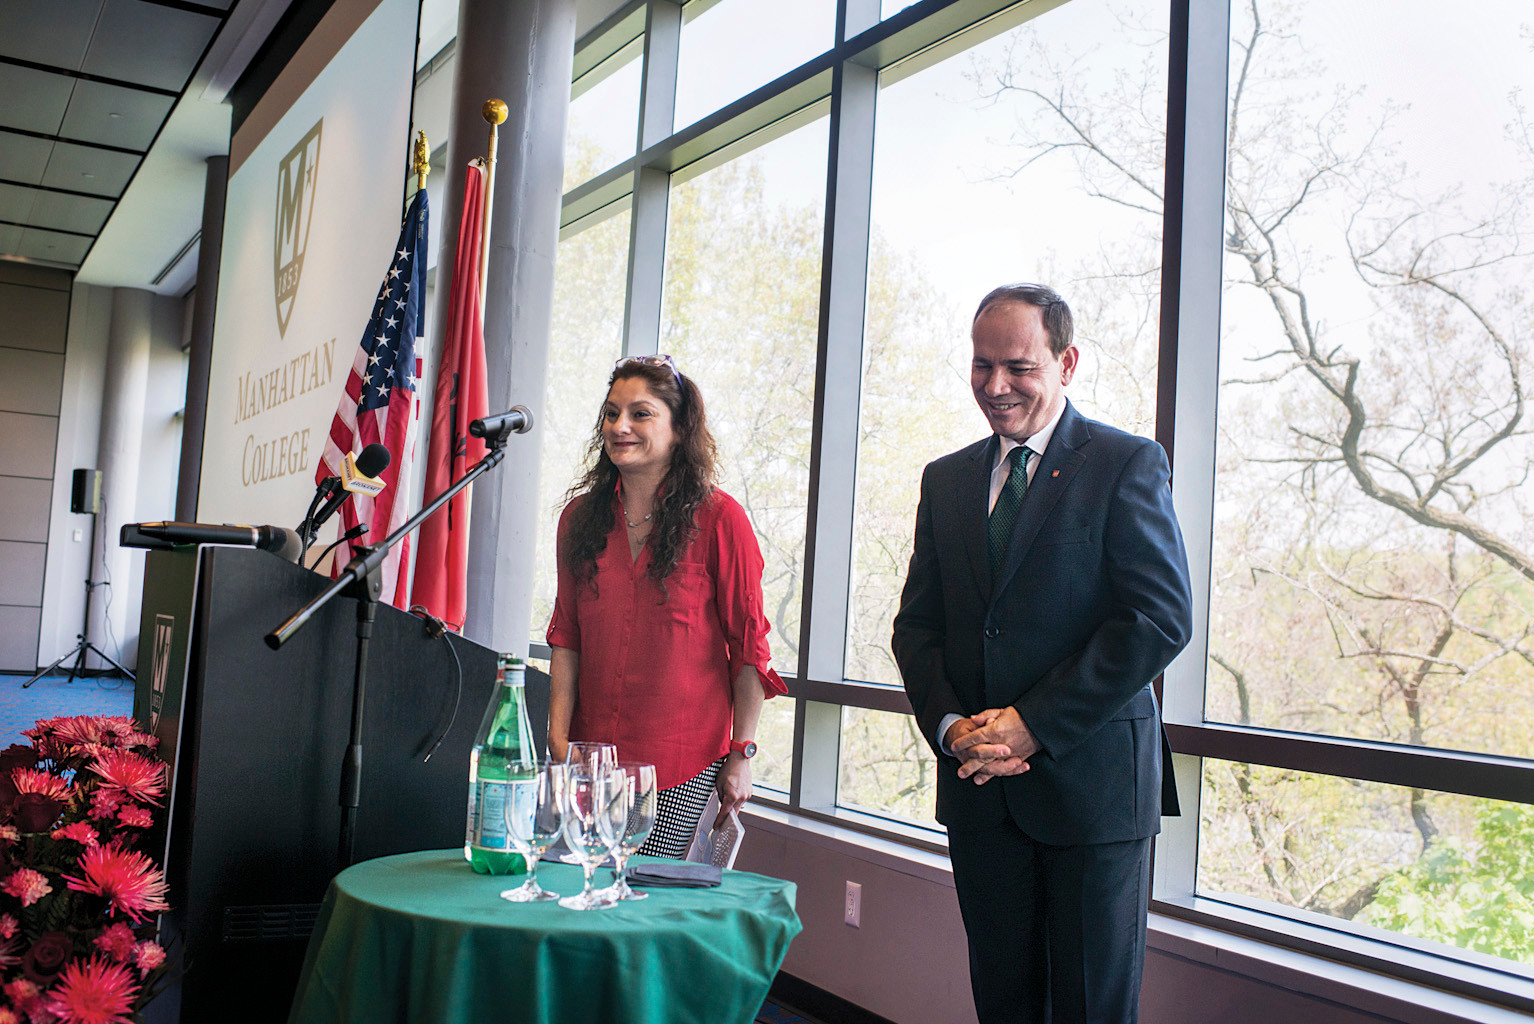 Albanian President Bujar Nishani stands with Manhattan College religious studies professor Mehnaz Afridi after giving a speech to students and faculty in the Kelly Commons.